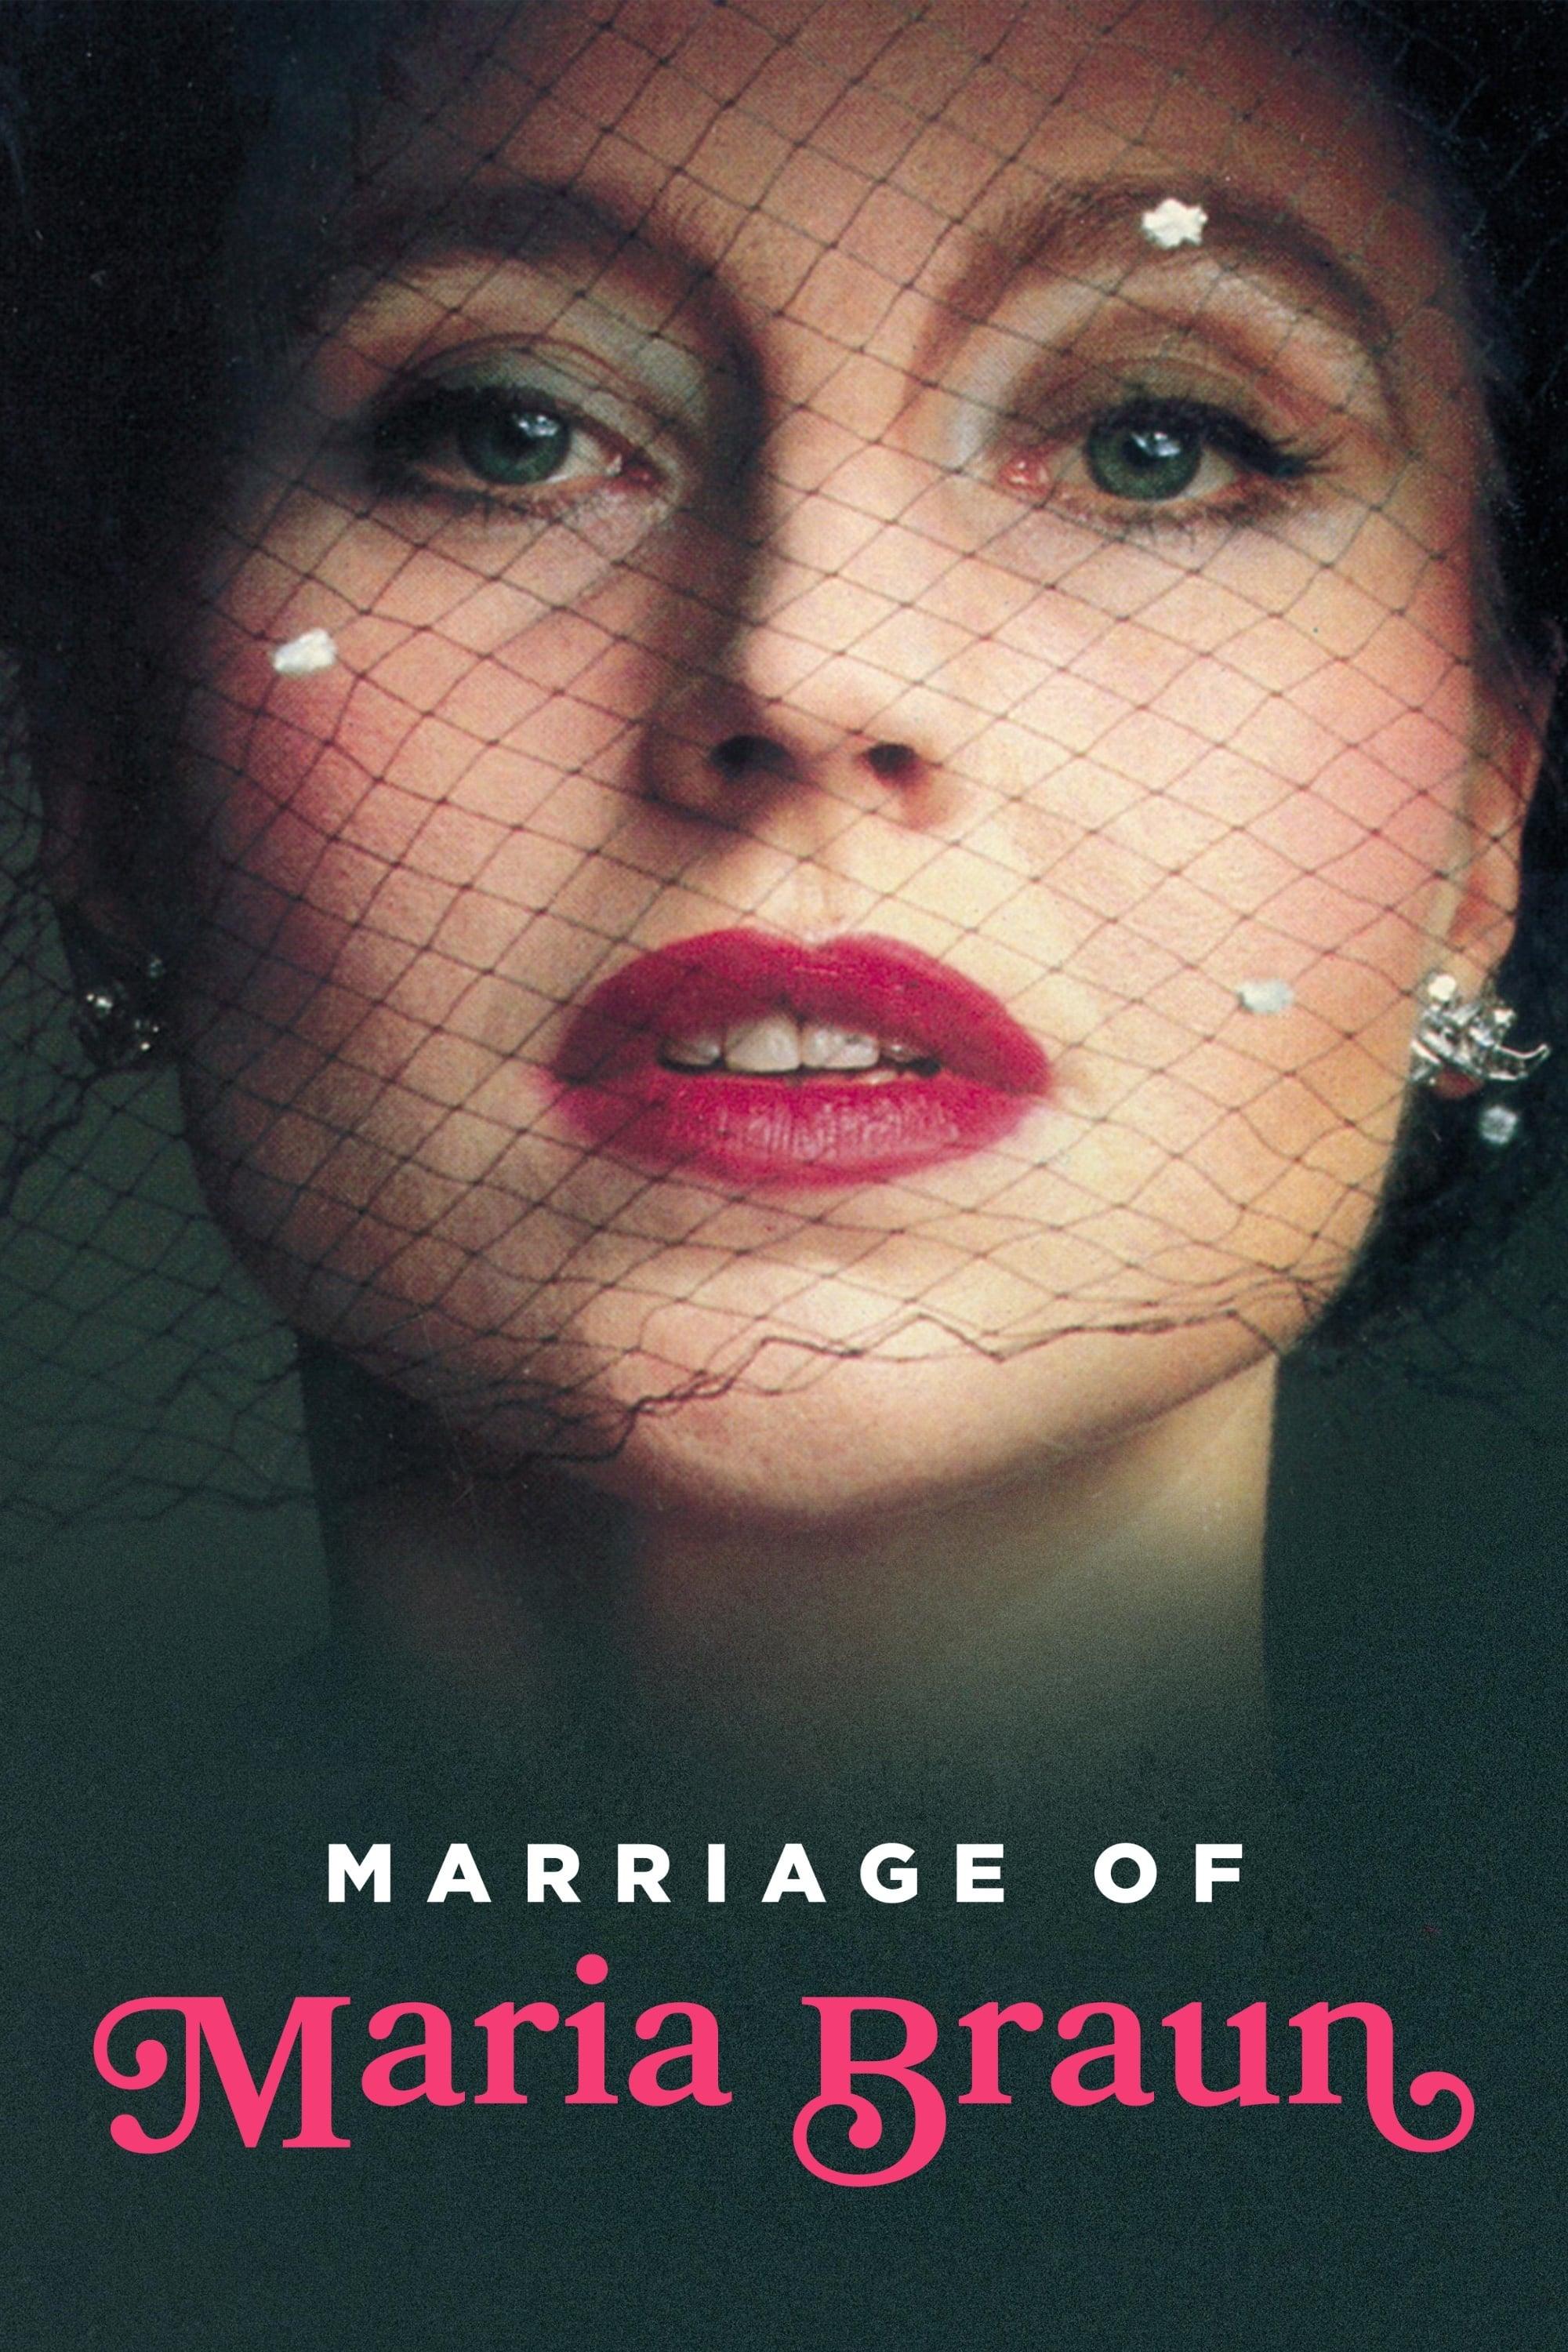 The Marriage of Maria Braun poster